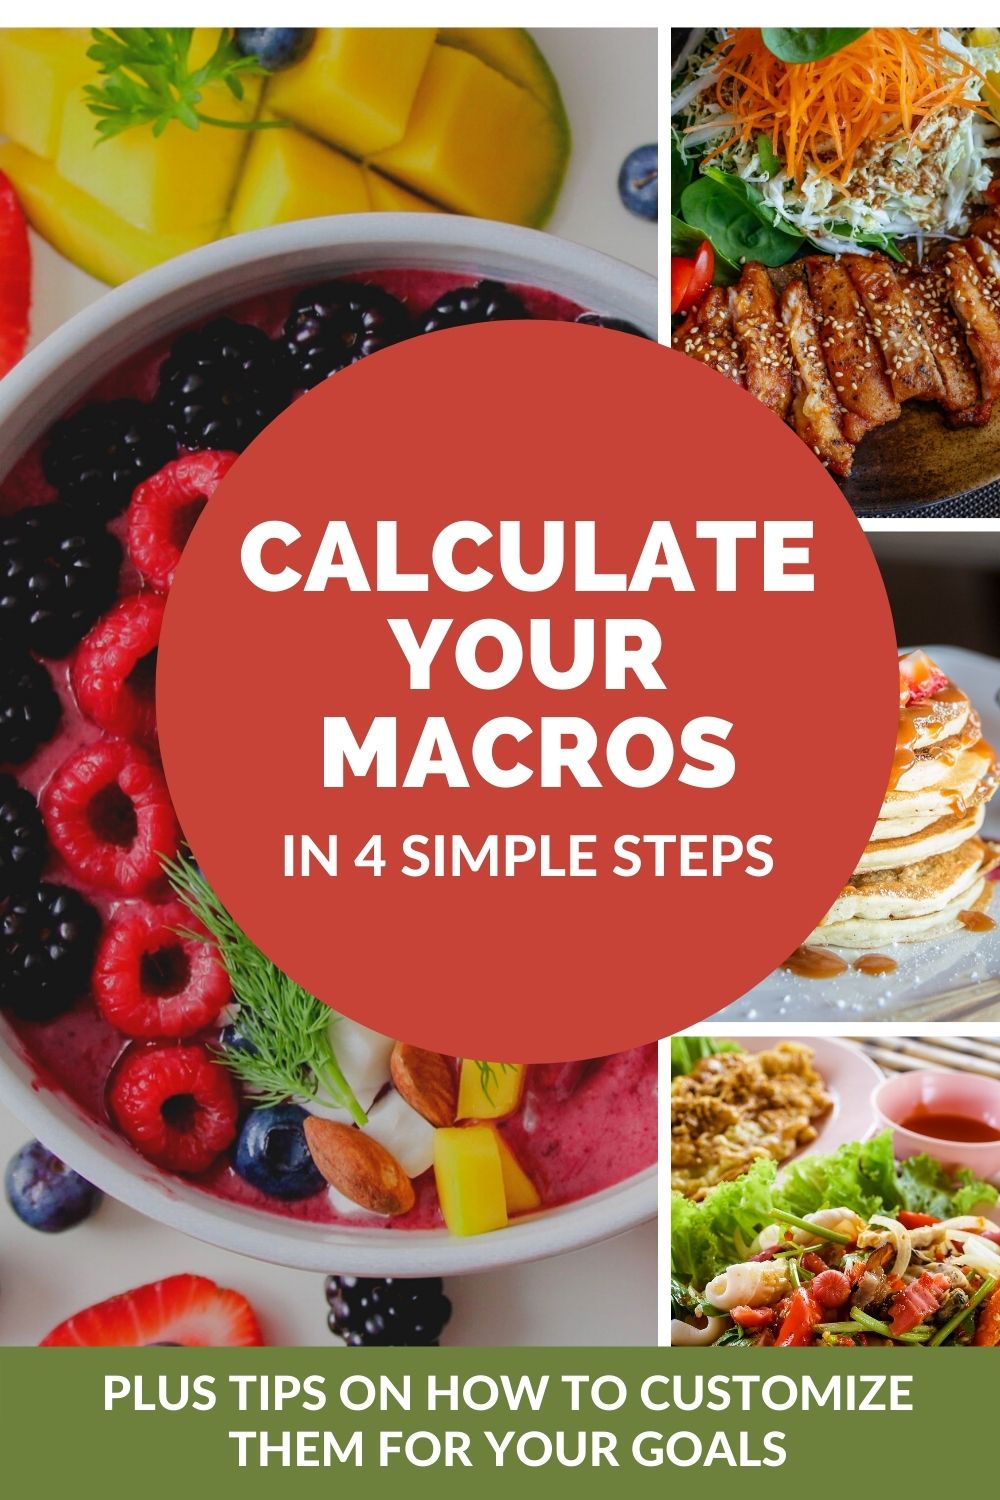 How to calculate macros